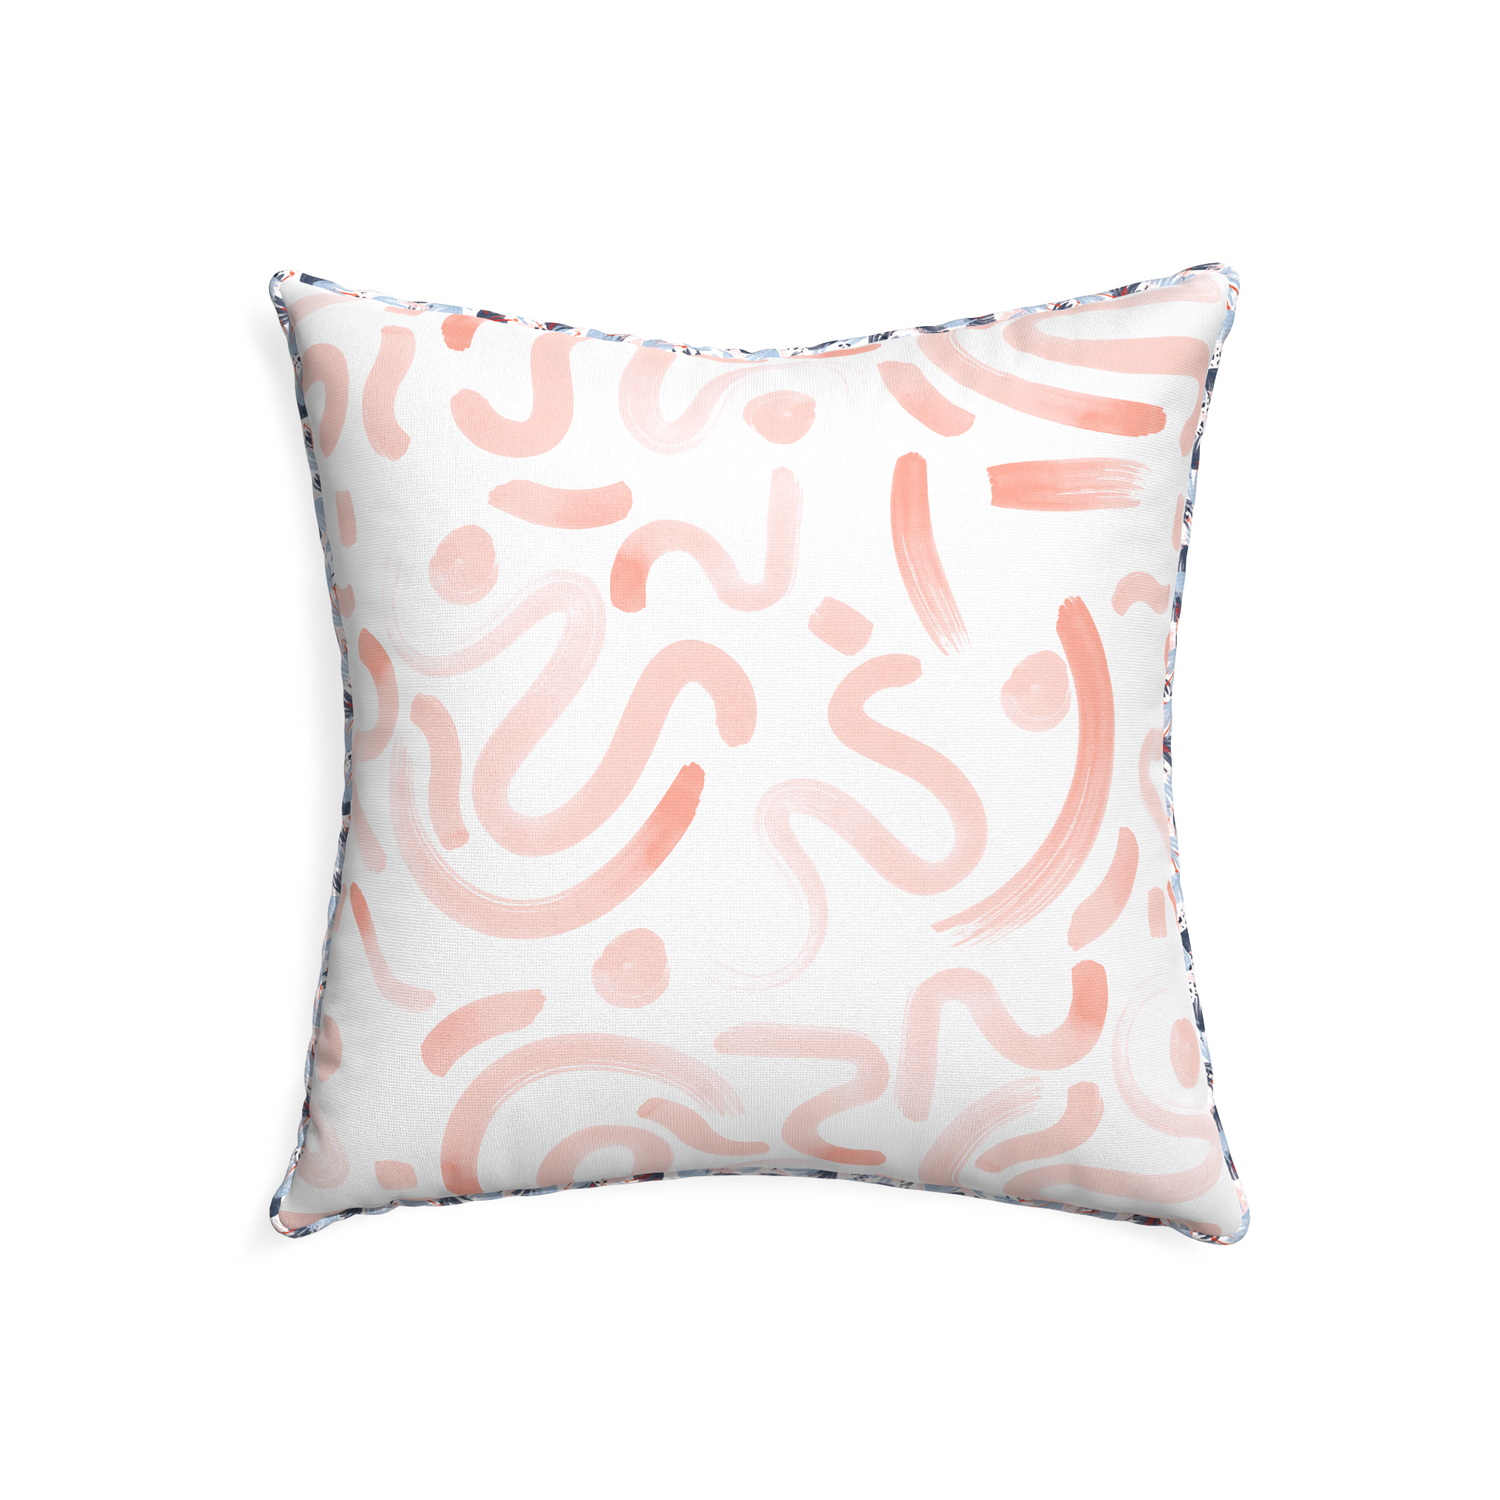 22-square hockney pink custom pillow with e piping on white background